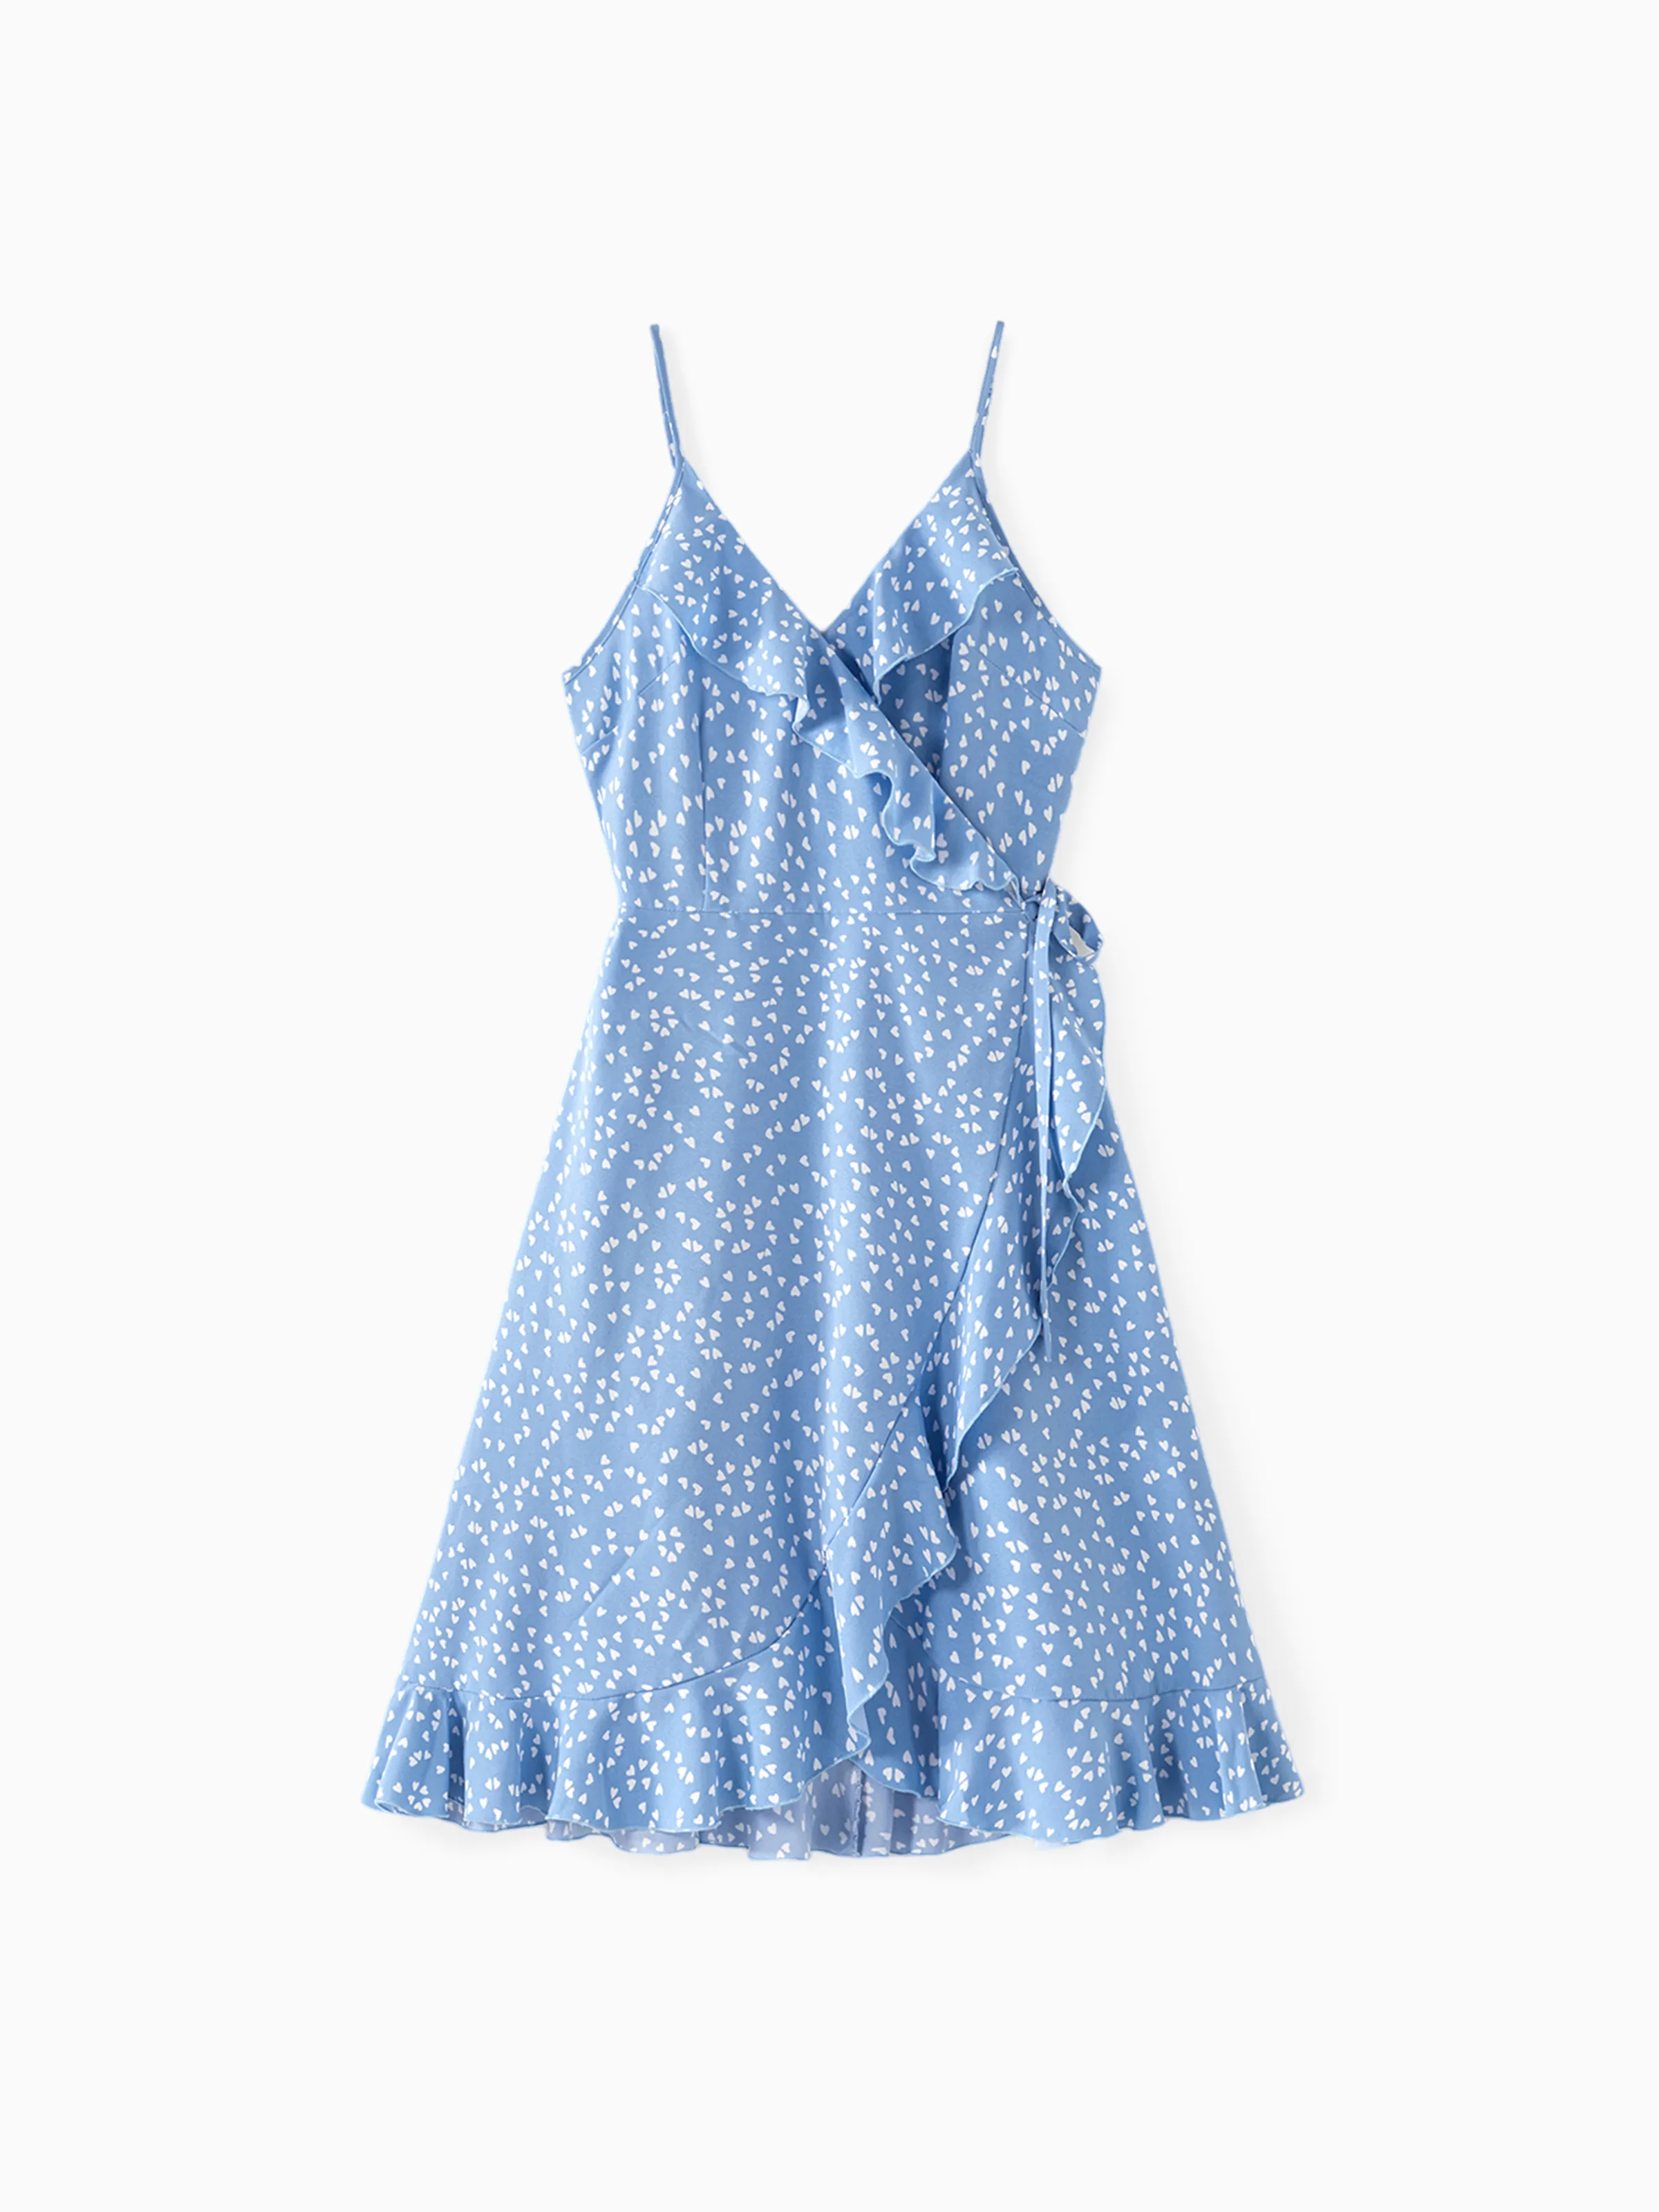 

All Over Dots Print Blue Sleeveless Spaghetti Strap V Neck Ruffle Wrap Dress for Mom and Me